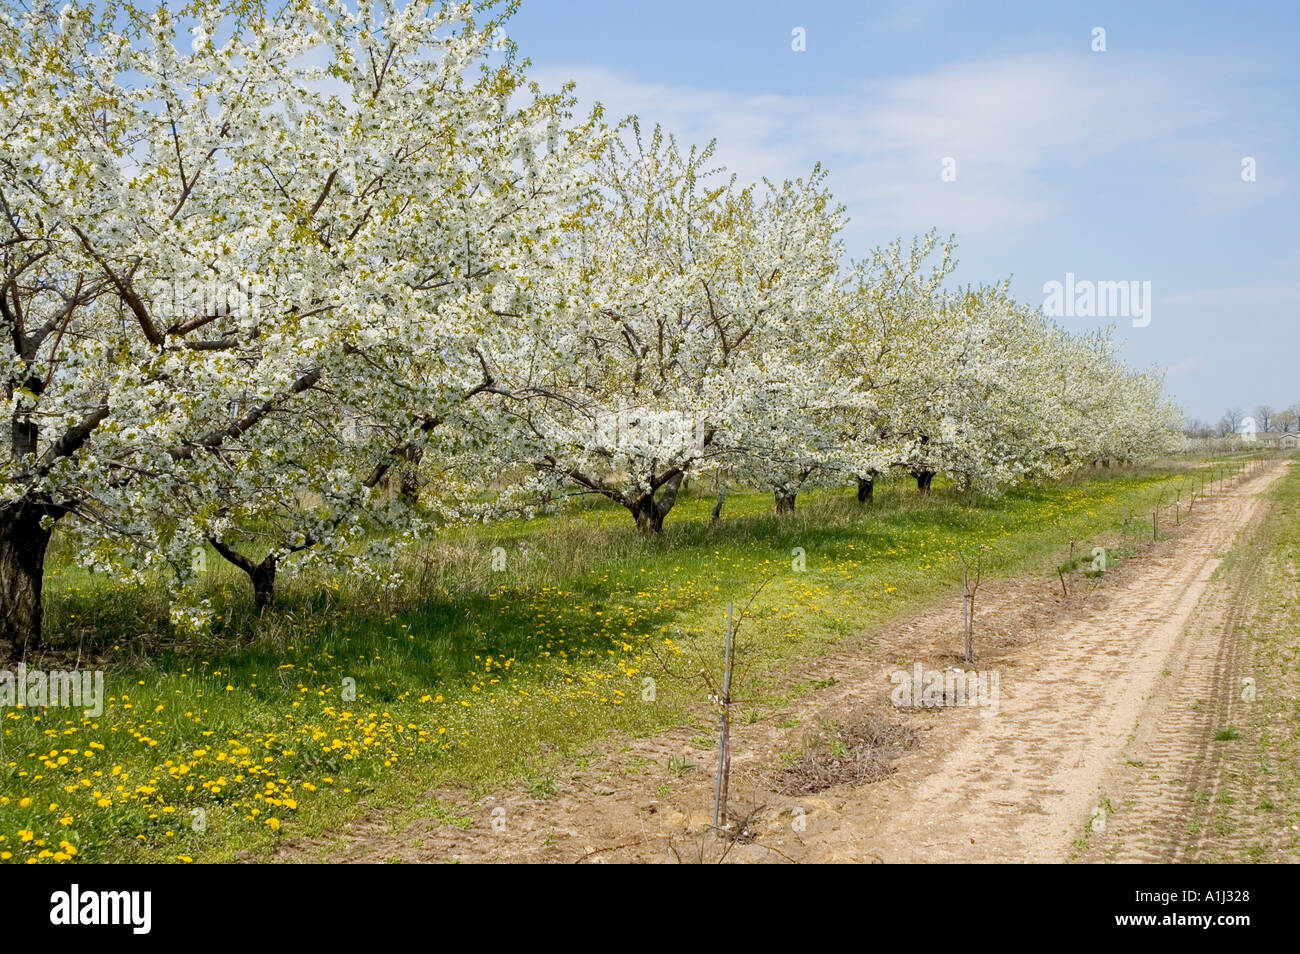 Cherry tree blossoms in bloom at Jeddo Michigan Cherry orchard Stock Photo